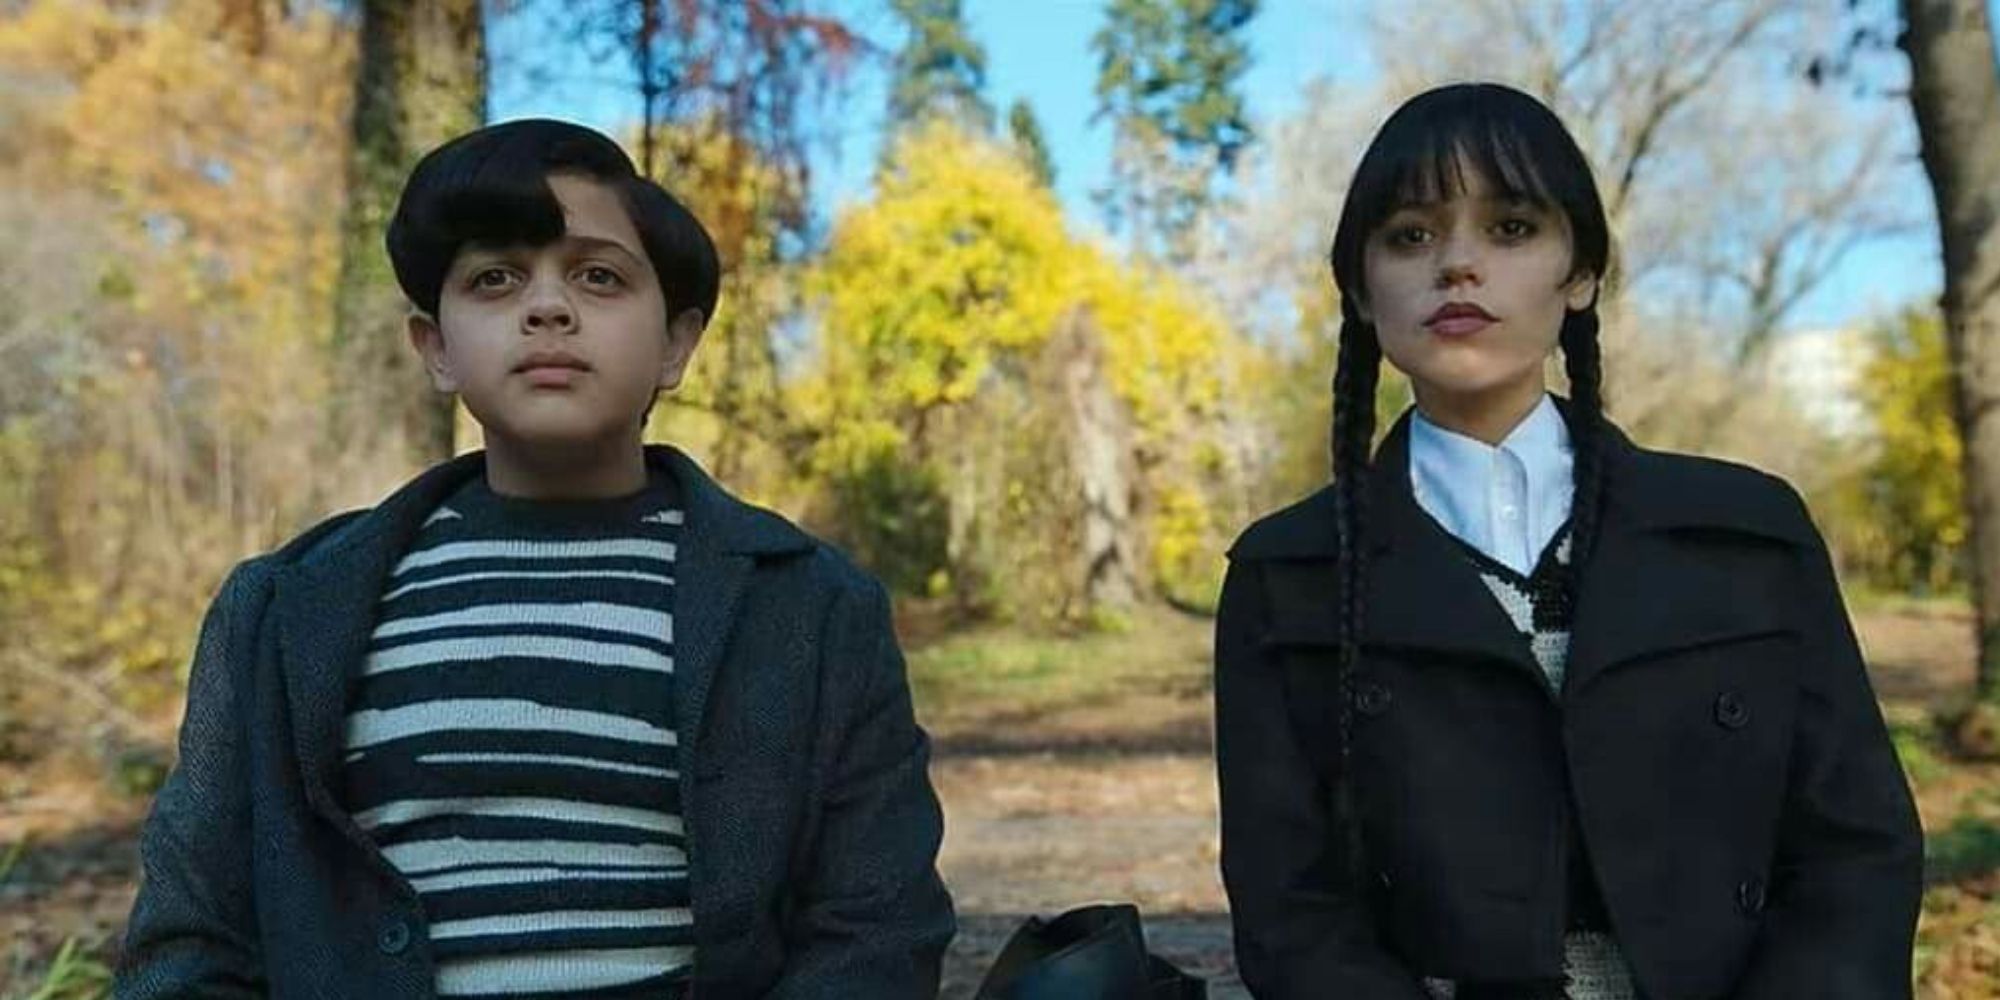 Isaac Ordonez and Jenna Ortega as Pugsley and Wednesday looking ahead in Wednesday